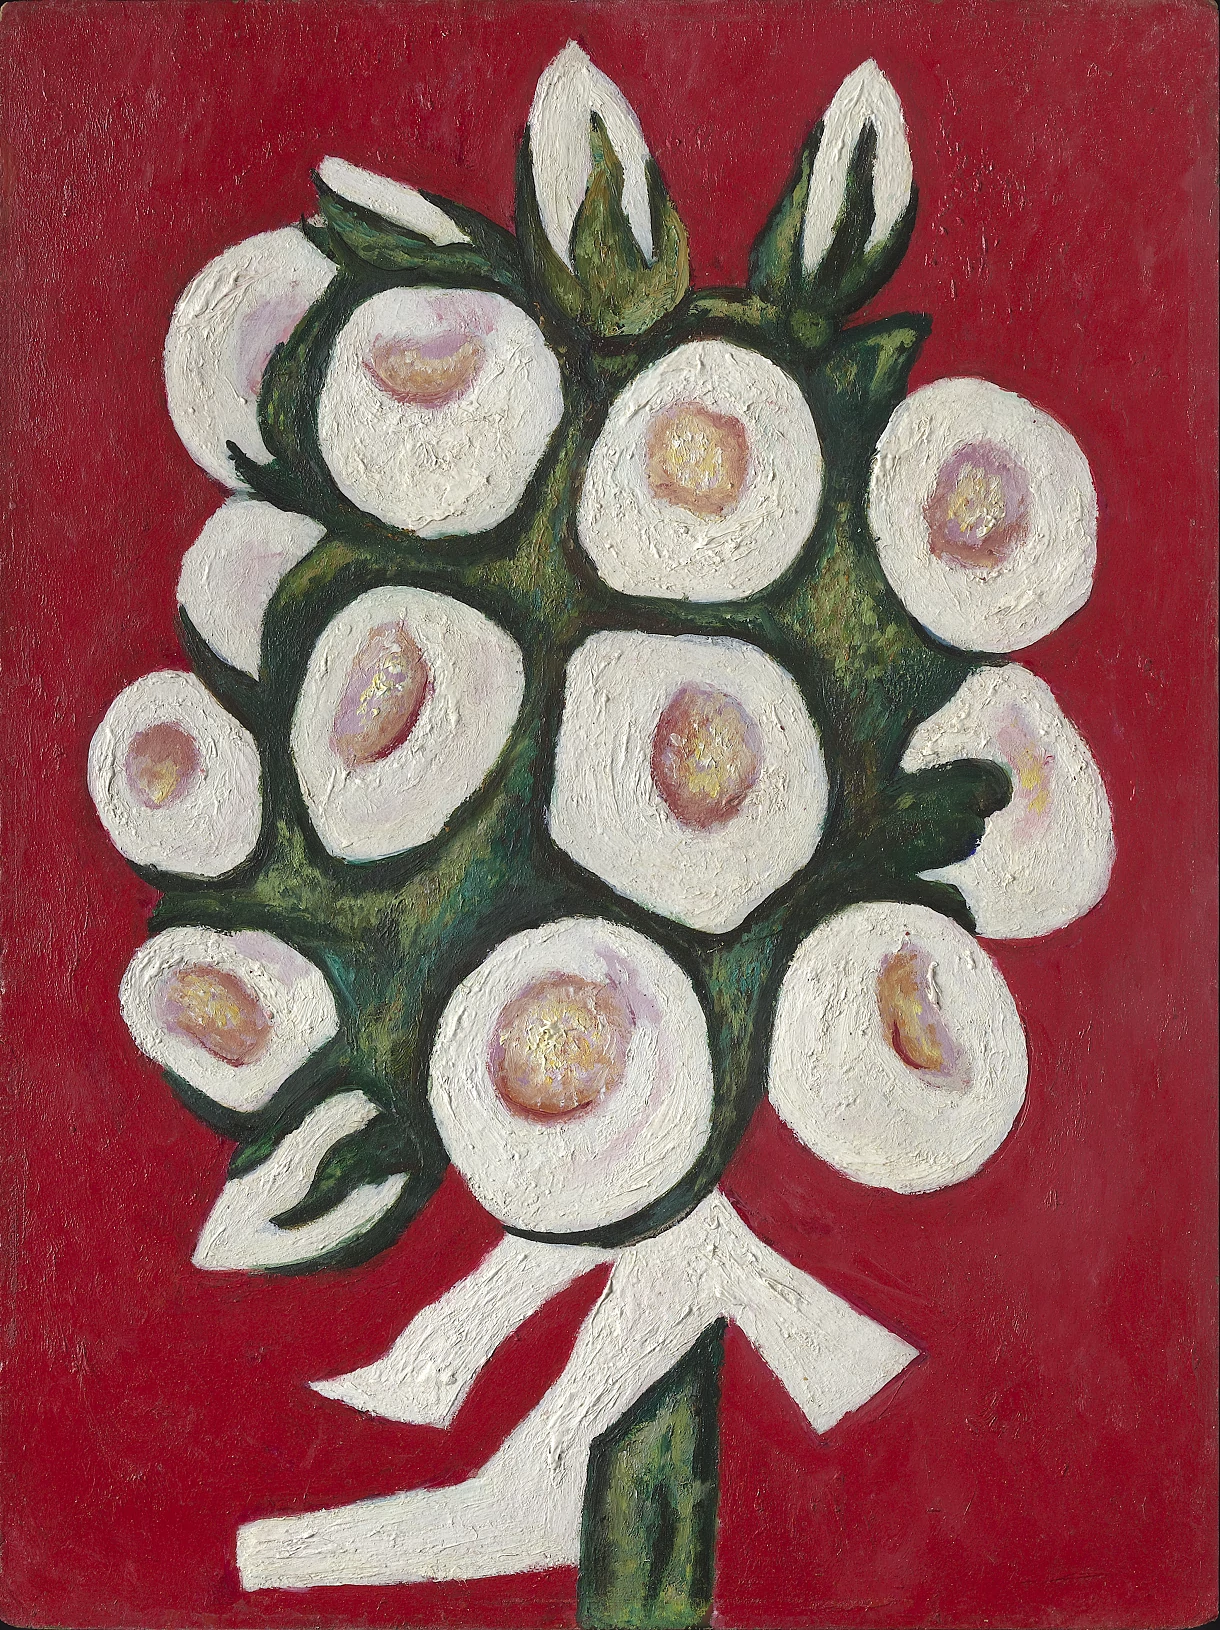 Roses for Seagulls that Lost Their Way, Marsden Hartley